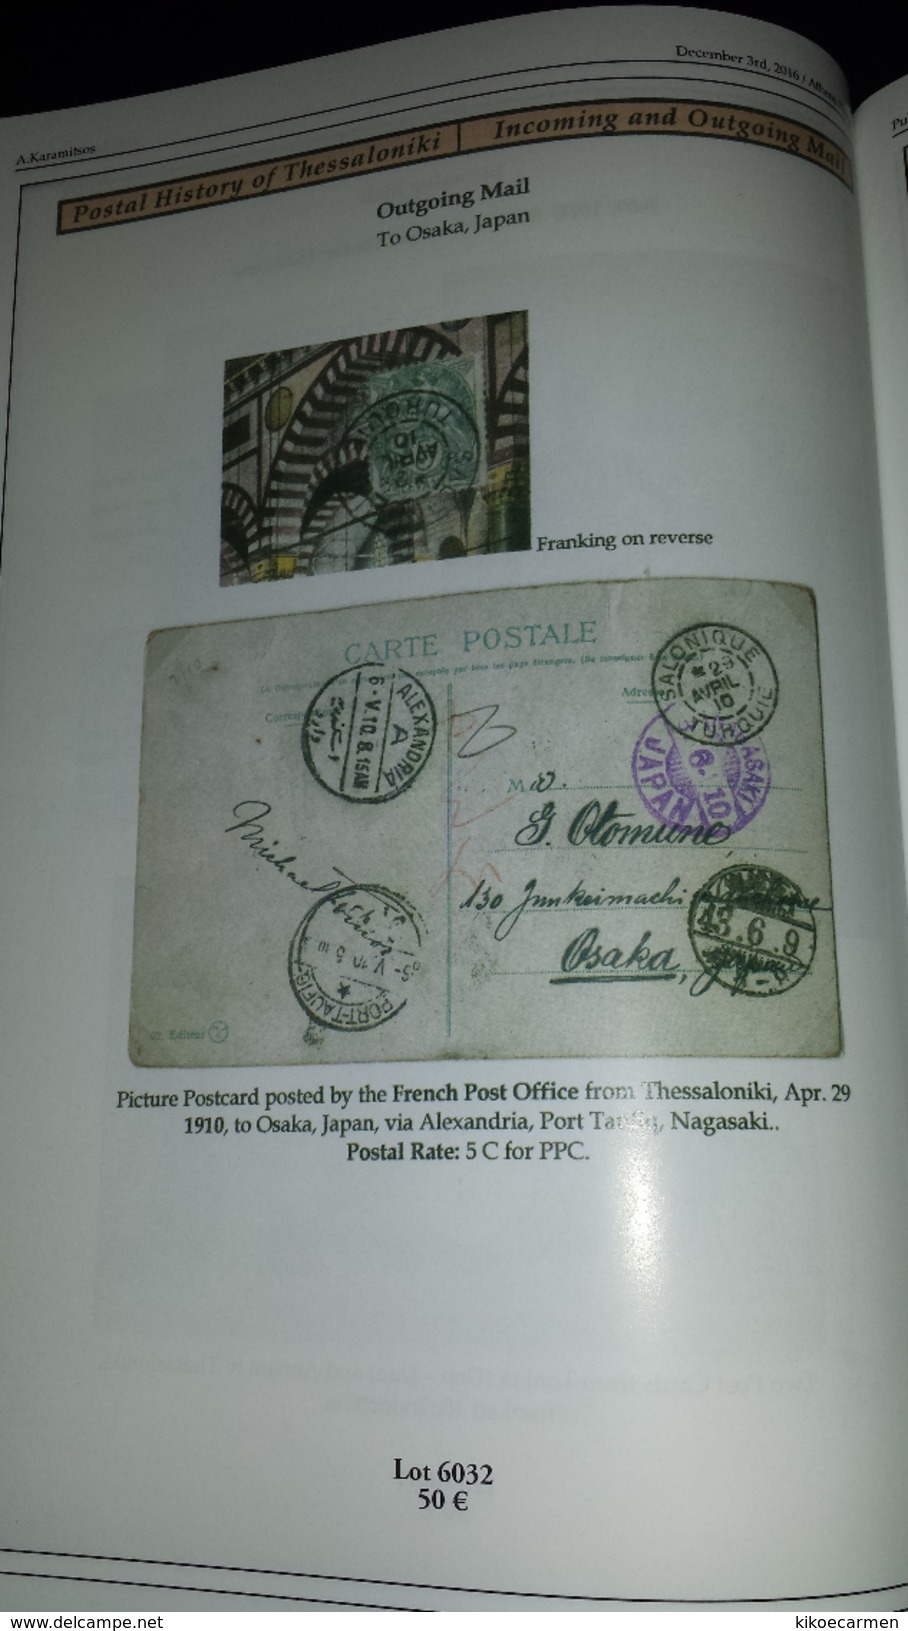 GREEK POSTAL HISTORY OF THESSALONIKI INCOMING AND OUTCOMING MAIL Greece Hellas 118colored pages  of THOMAREIS Collection